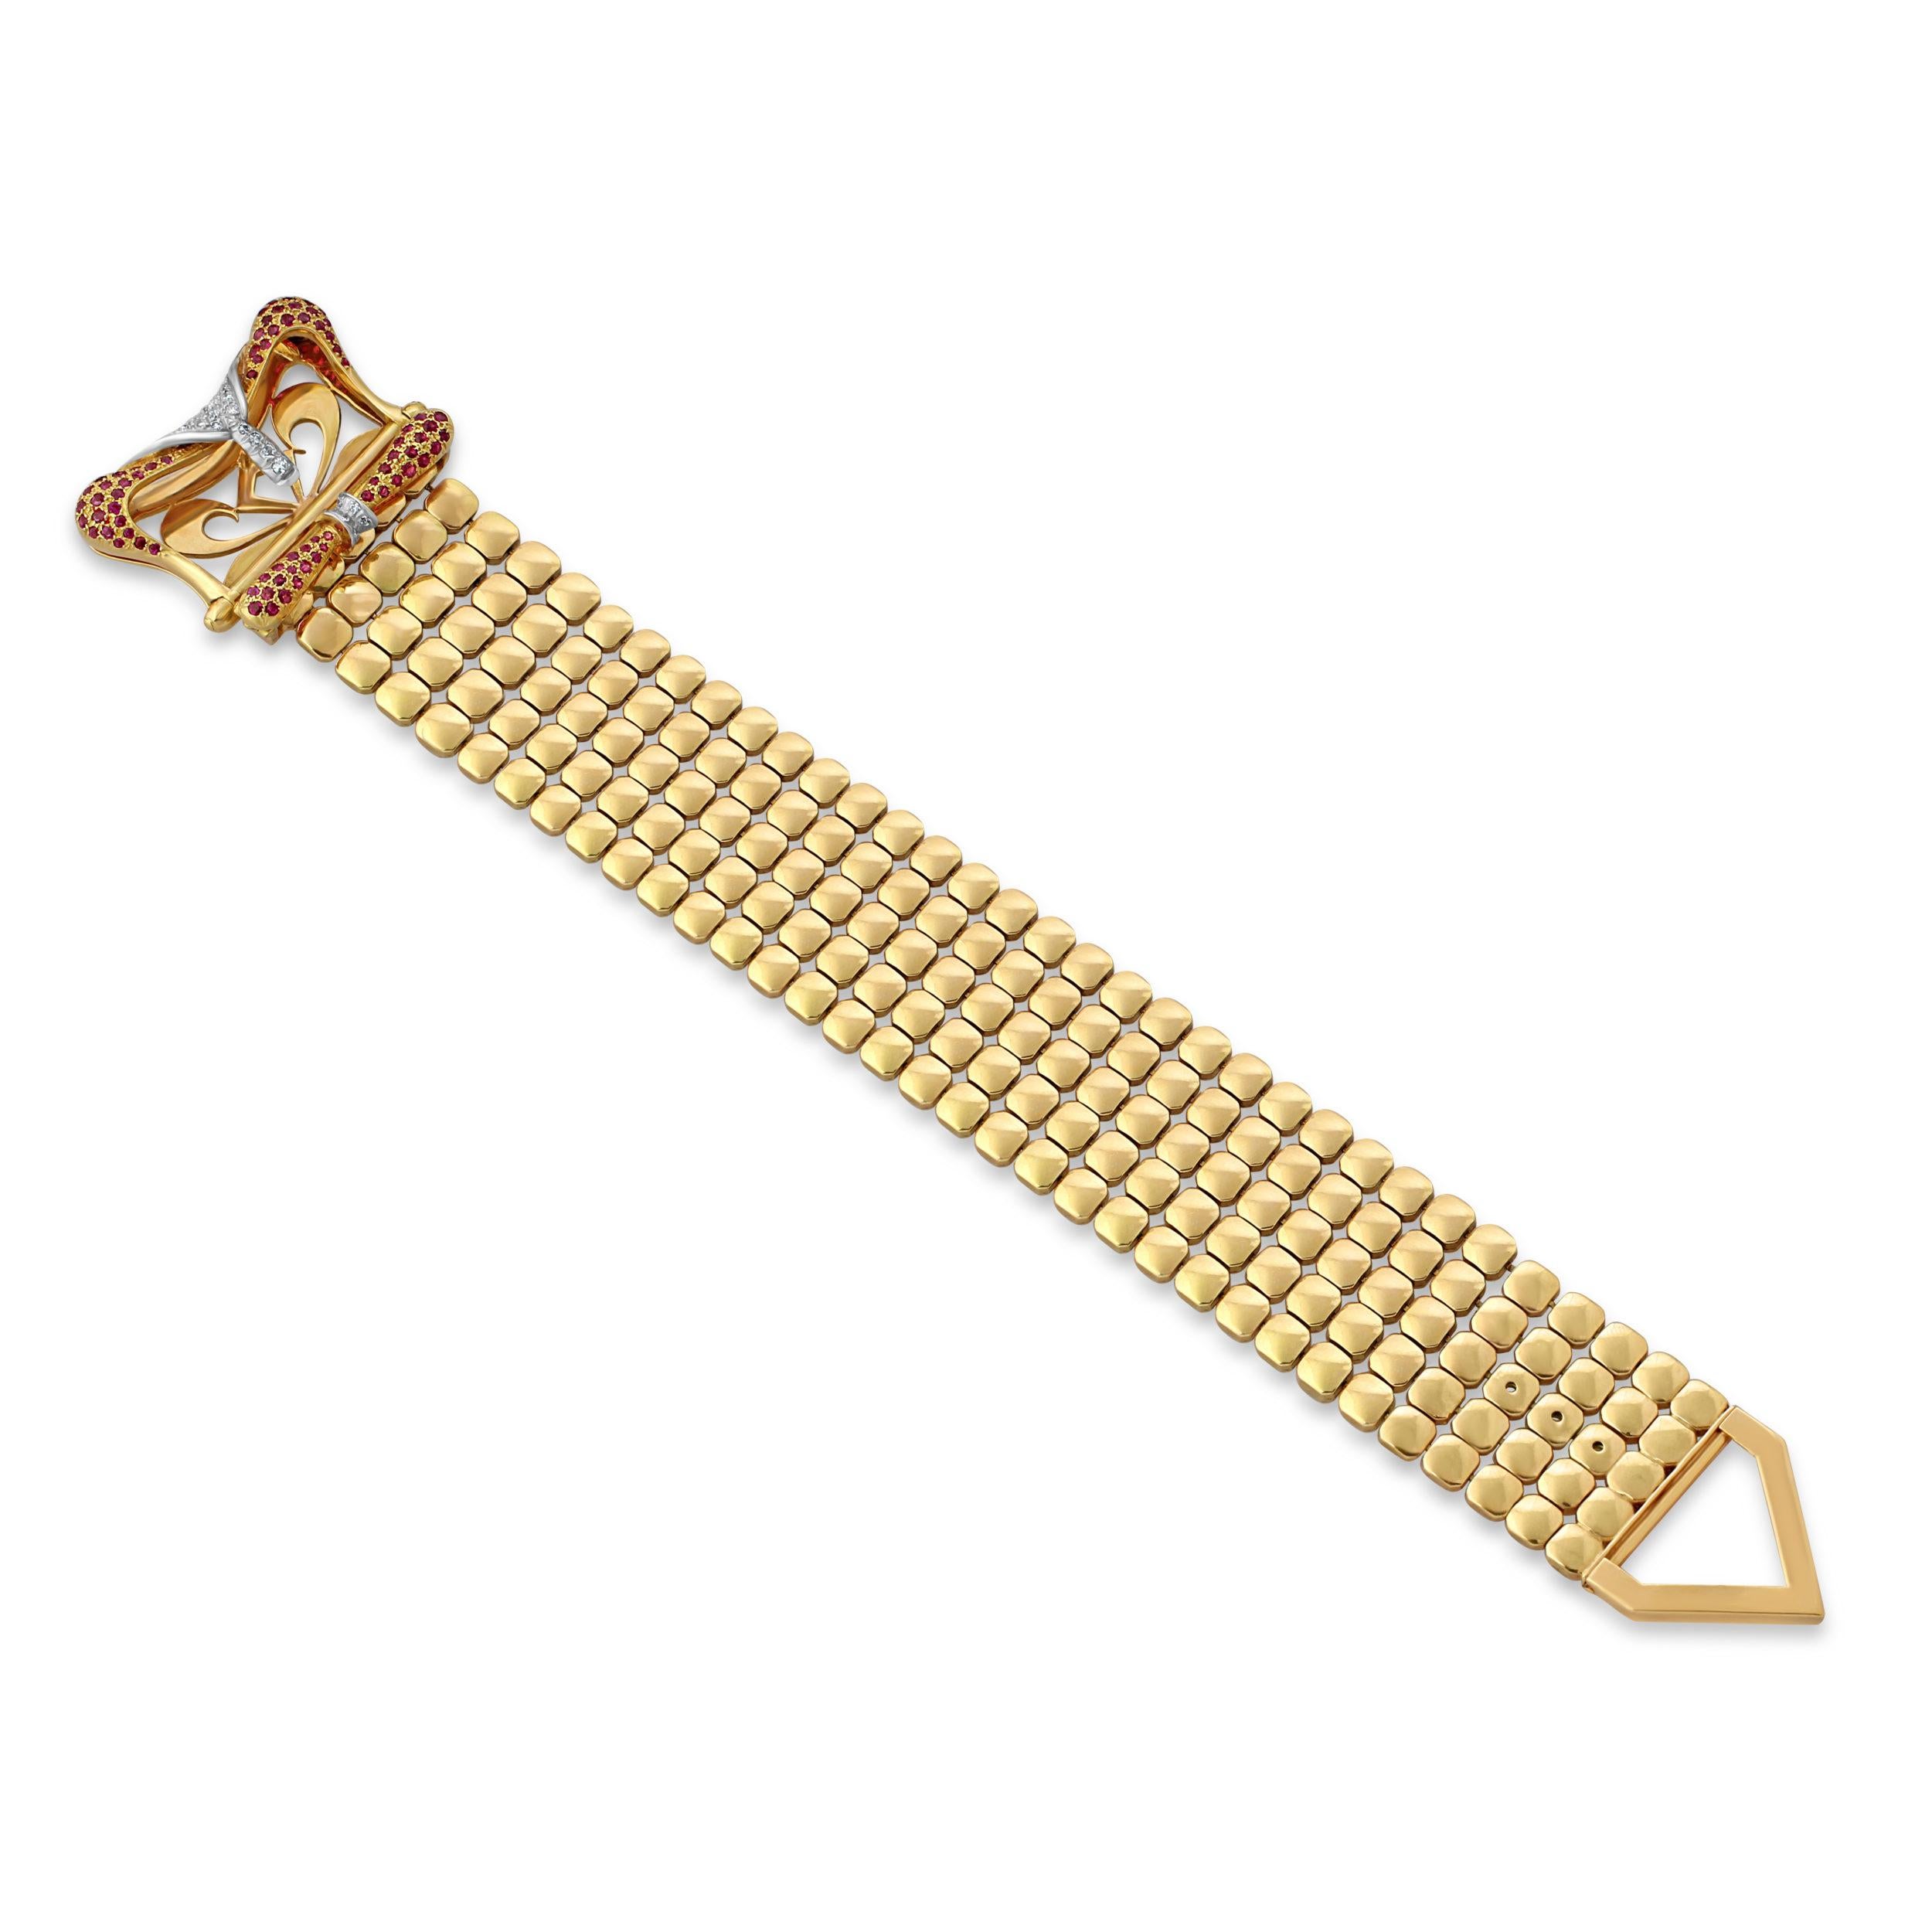 An 18k gold, ruby and diamond buckle bracelet. A bold and stylish statement bracelet crafted from small square panels in a flexible design for fluid movement. Length = 26cm, Weight = 136.5gr. Circa 1960s.